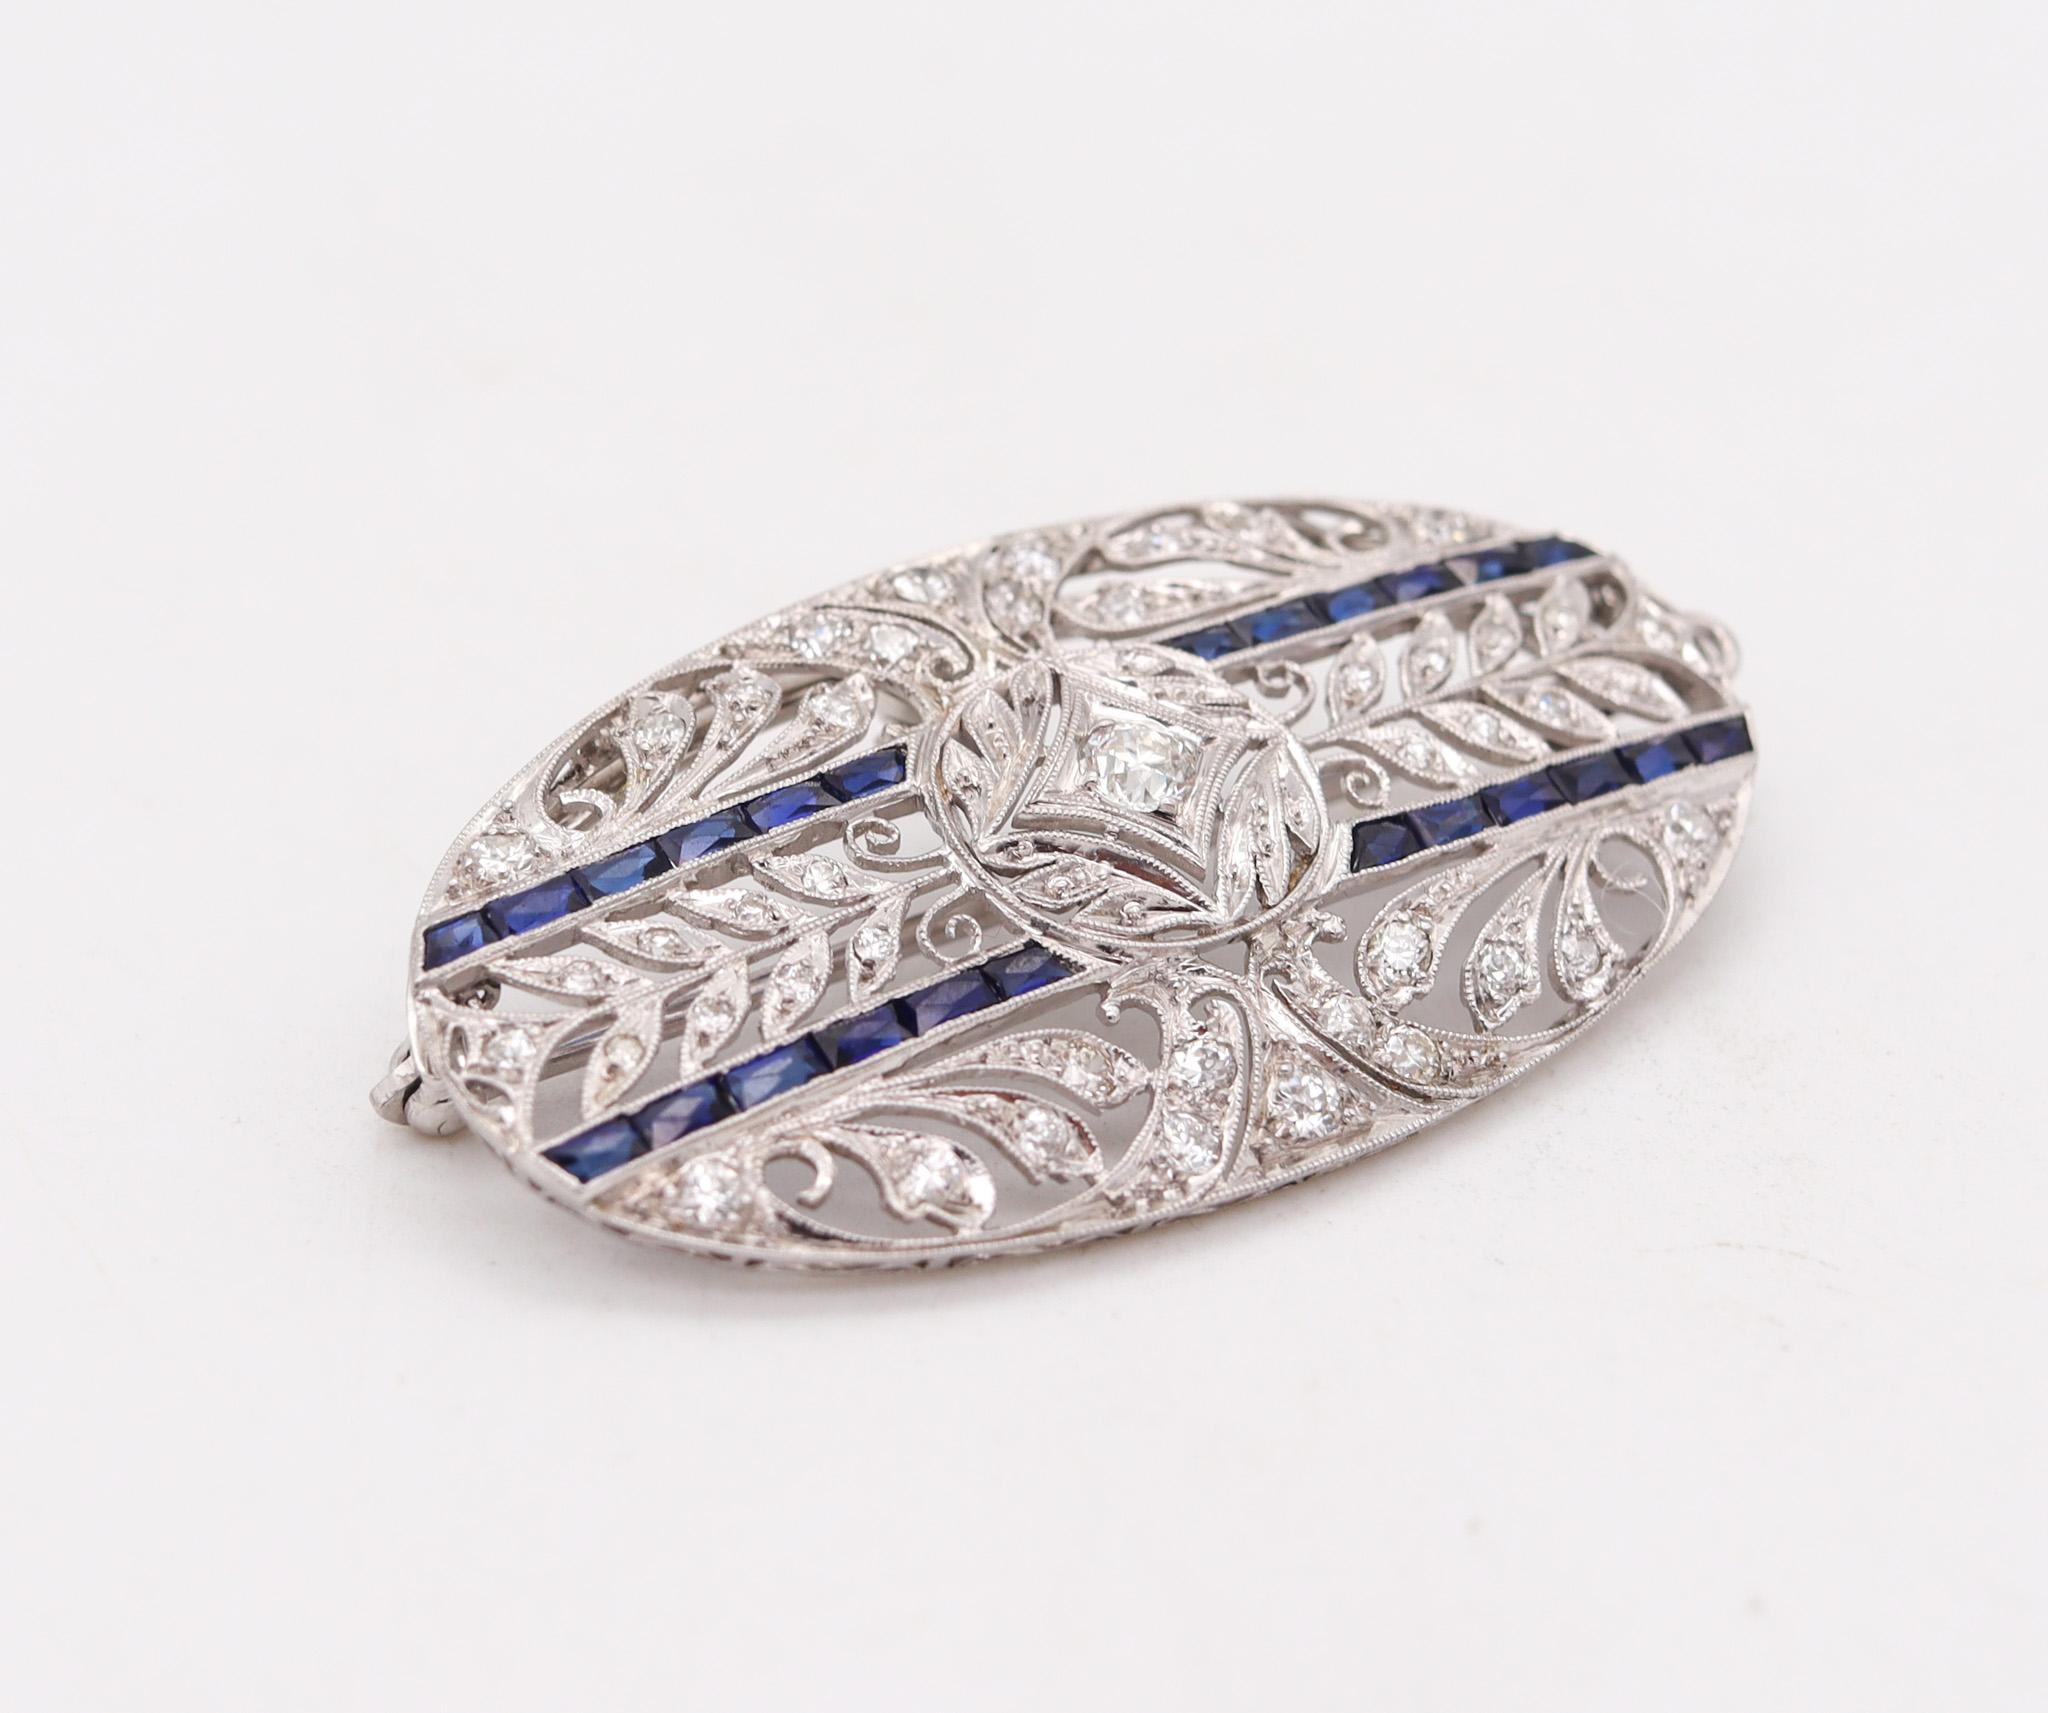 Belle Époque Edwardian 1910 Pendant Brooch in Platinum with 2.35 Ctw in Diamonds and Sapphire For Sale